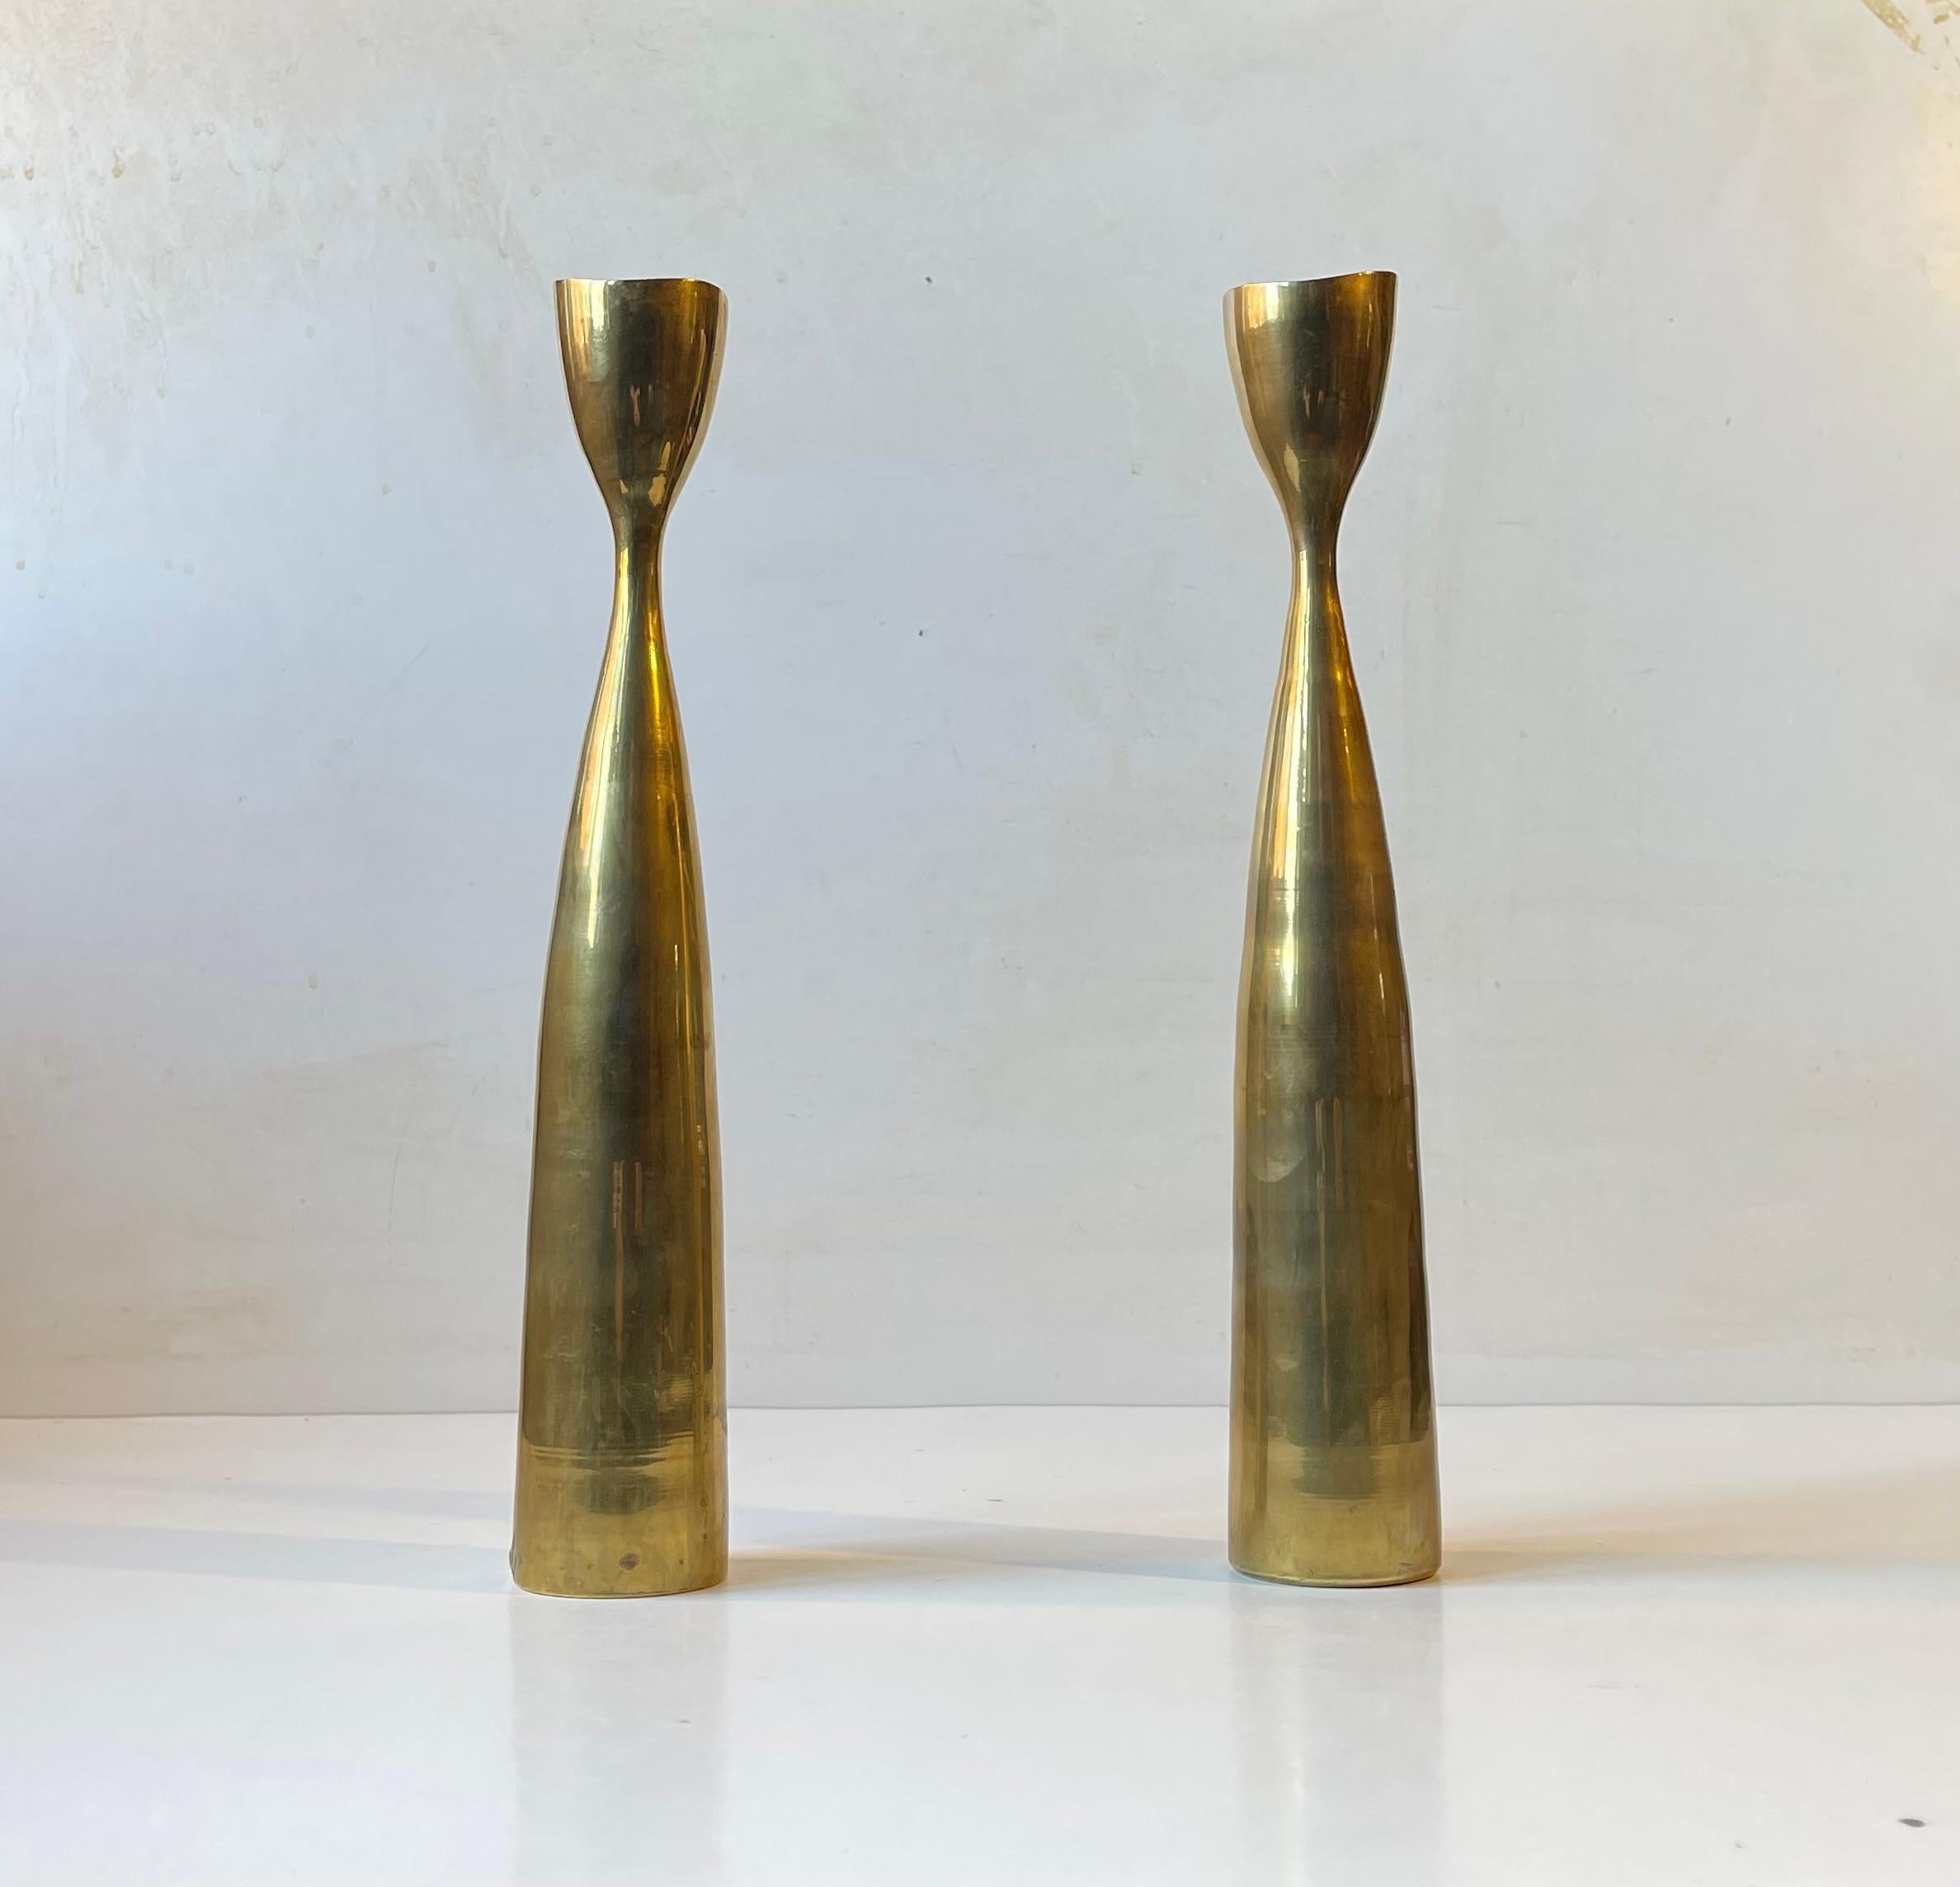 A pair of tall organically shaped tulip candlesticks in brass. Designed and manufactured in Scandinavia during the 1960s ina style reminiscent of Pierre Forssell and Jens Harald Quistgaard. The candlesticks are to be fitted with regular sixed